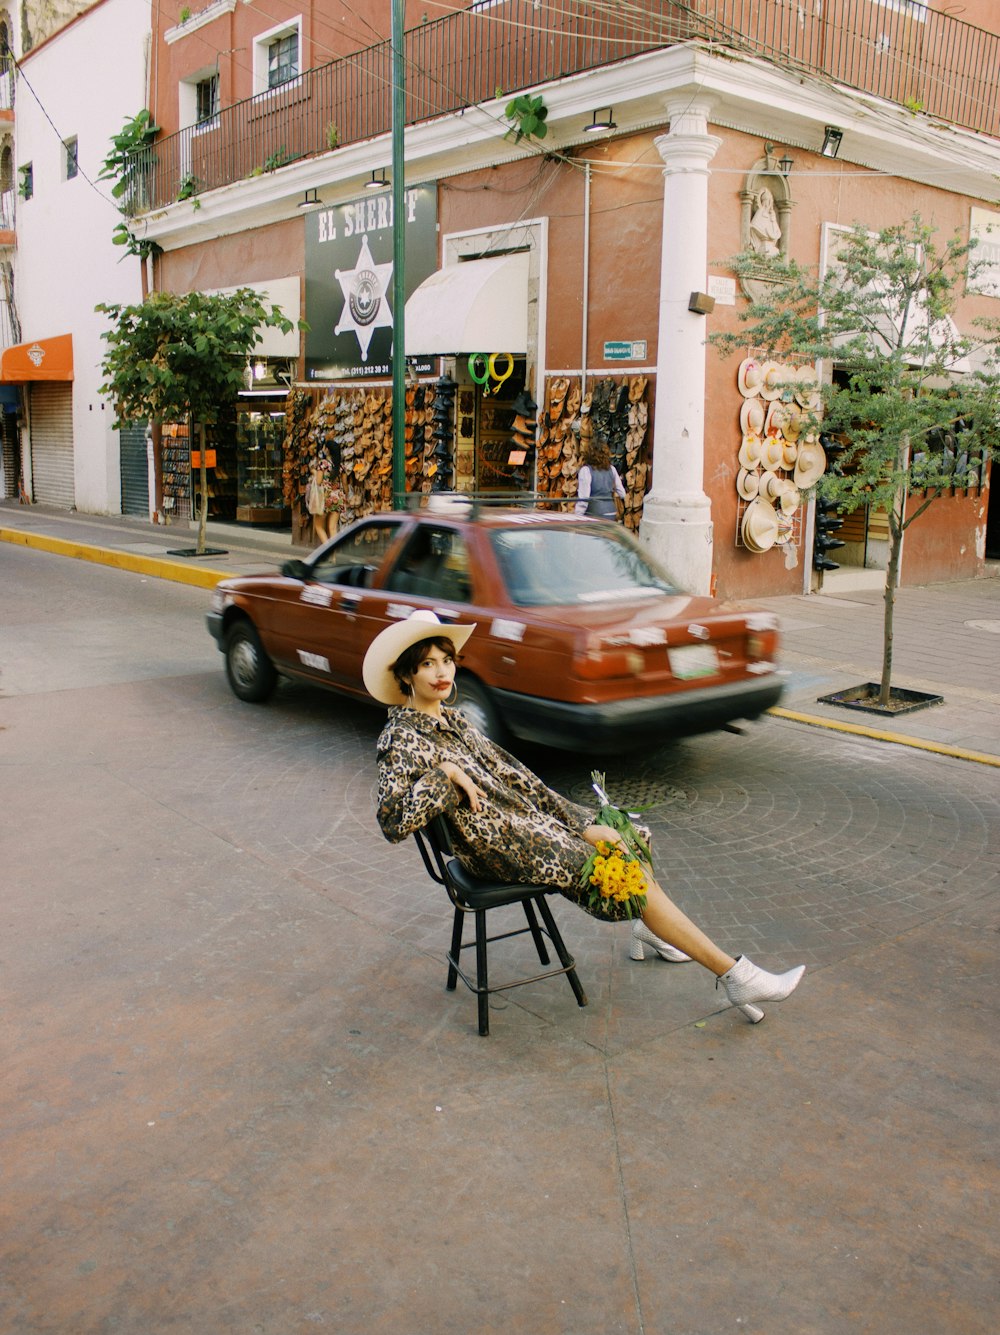 a woman sitting on a chair in the middle of the street